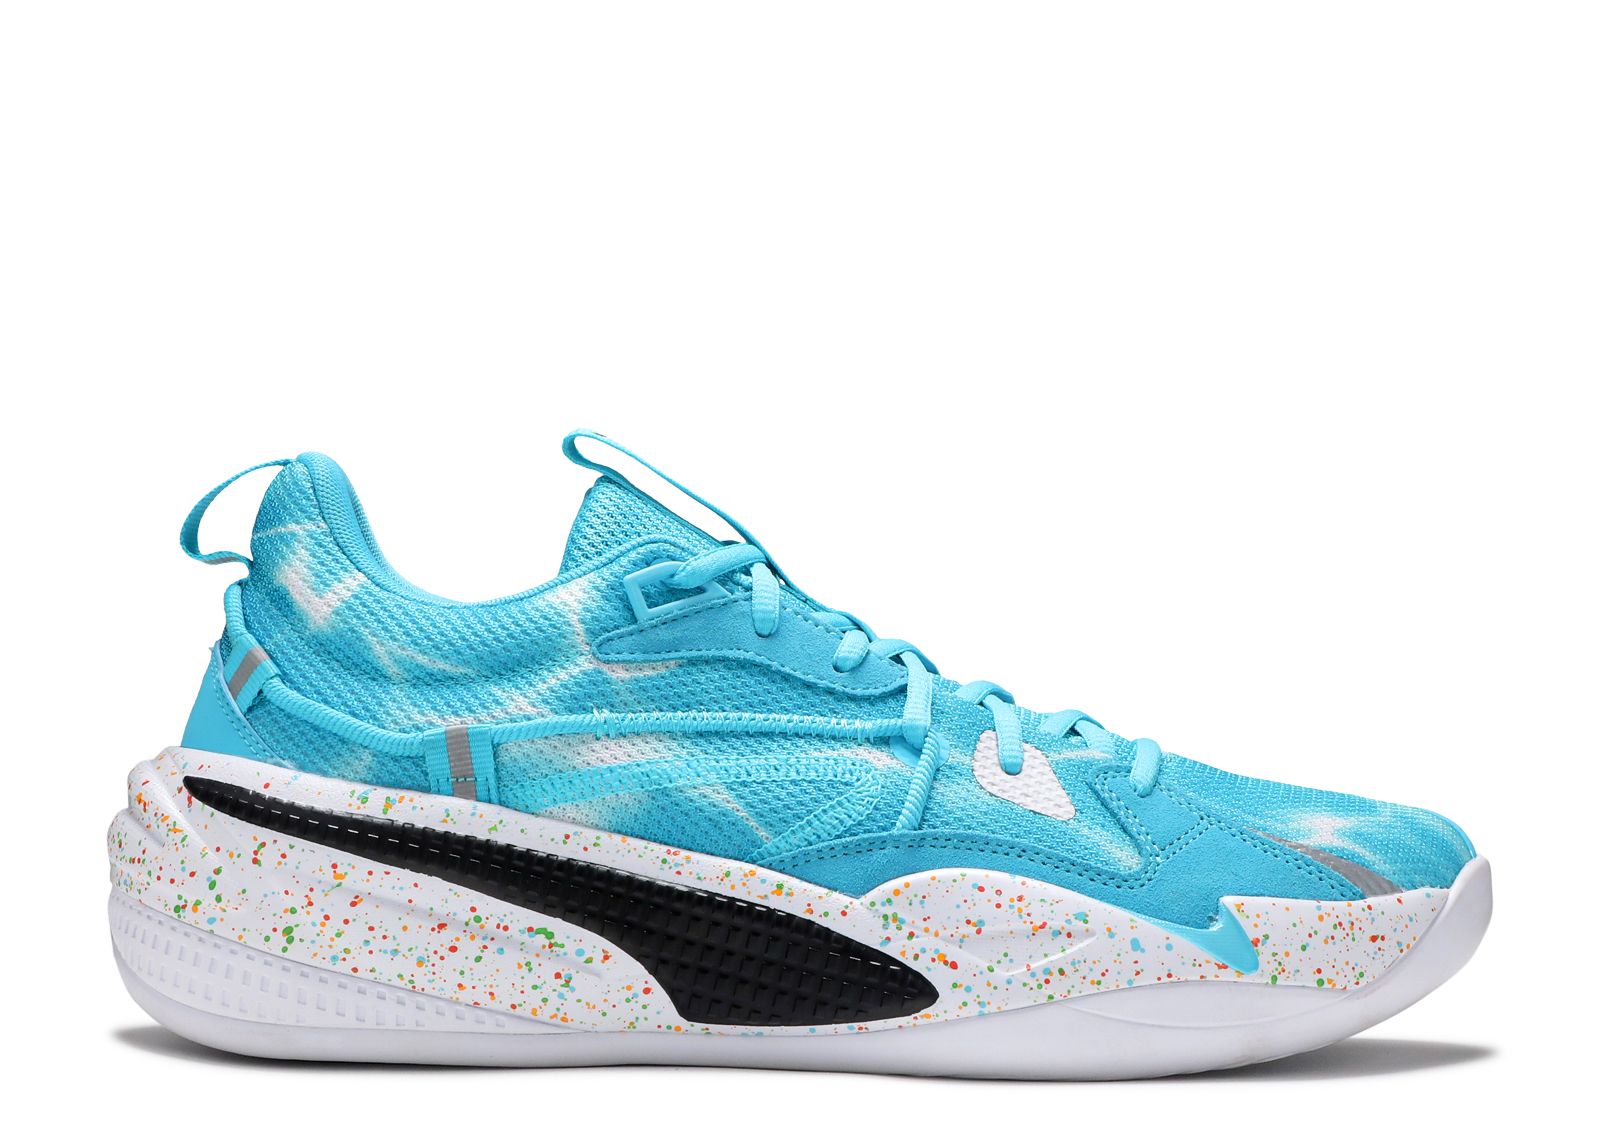 The Original Puma RS-Dreamer Colorway Is Releasing This Week | Complex